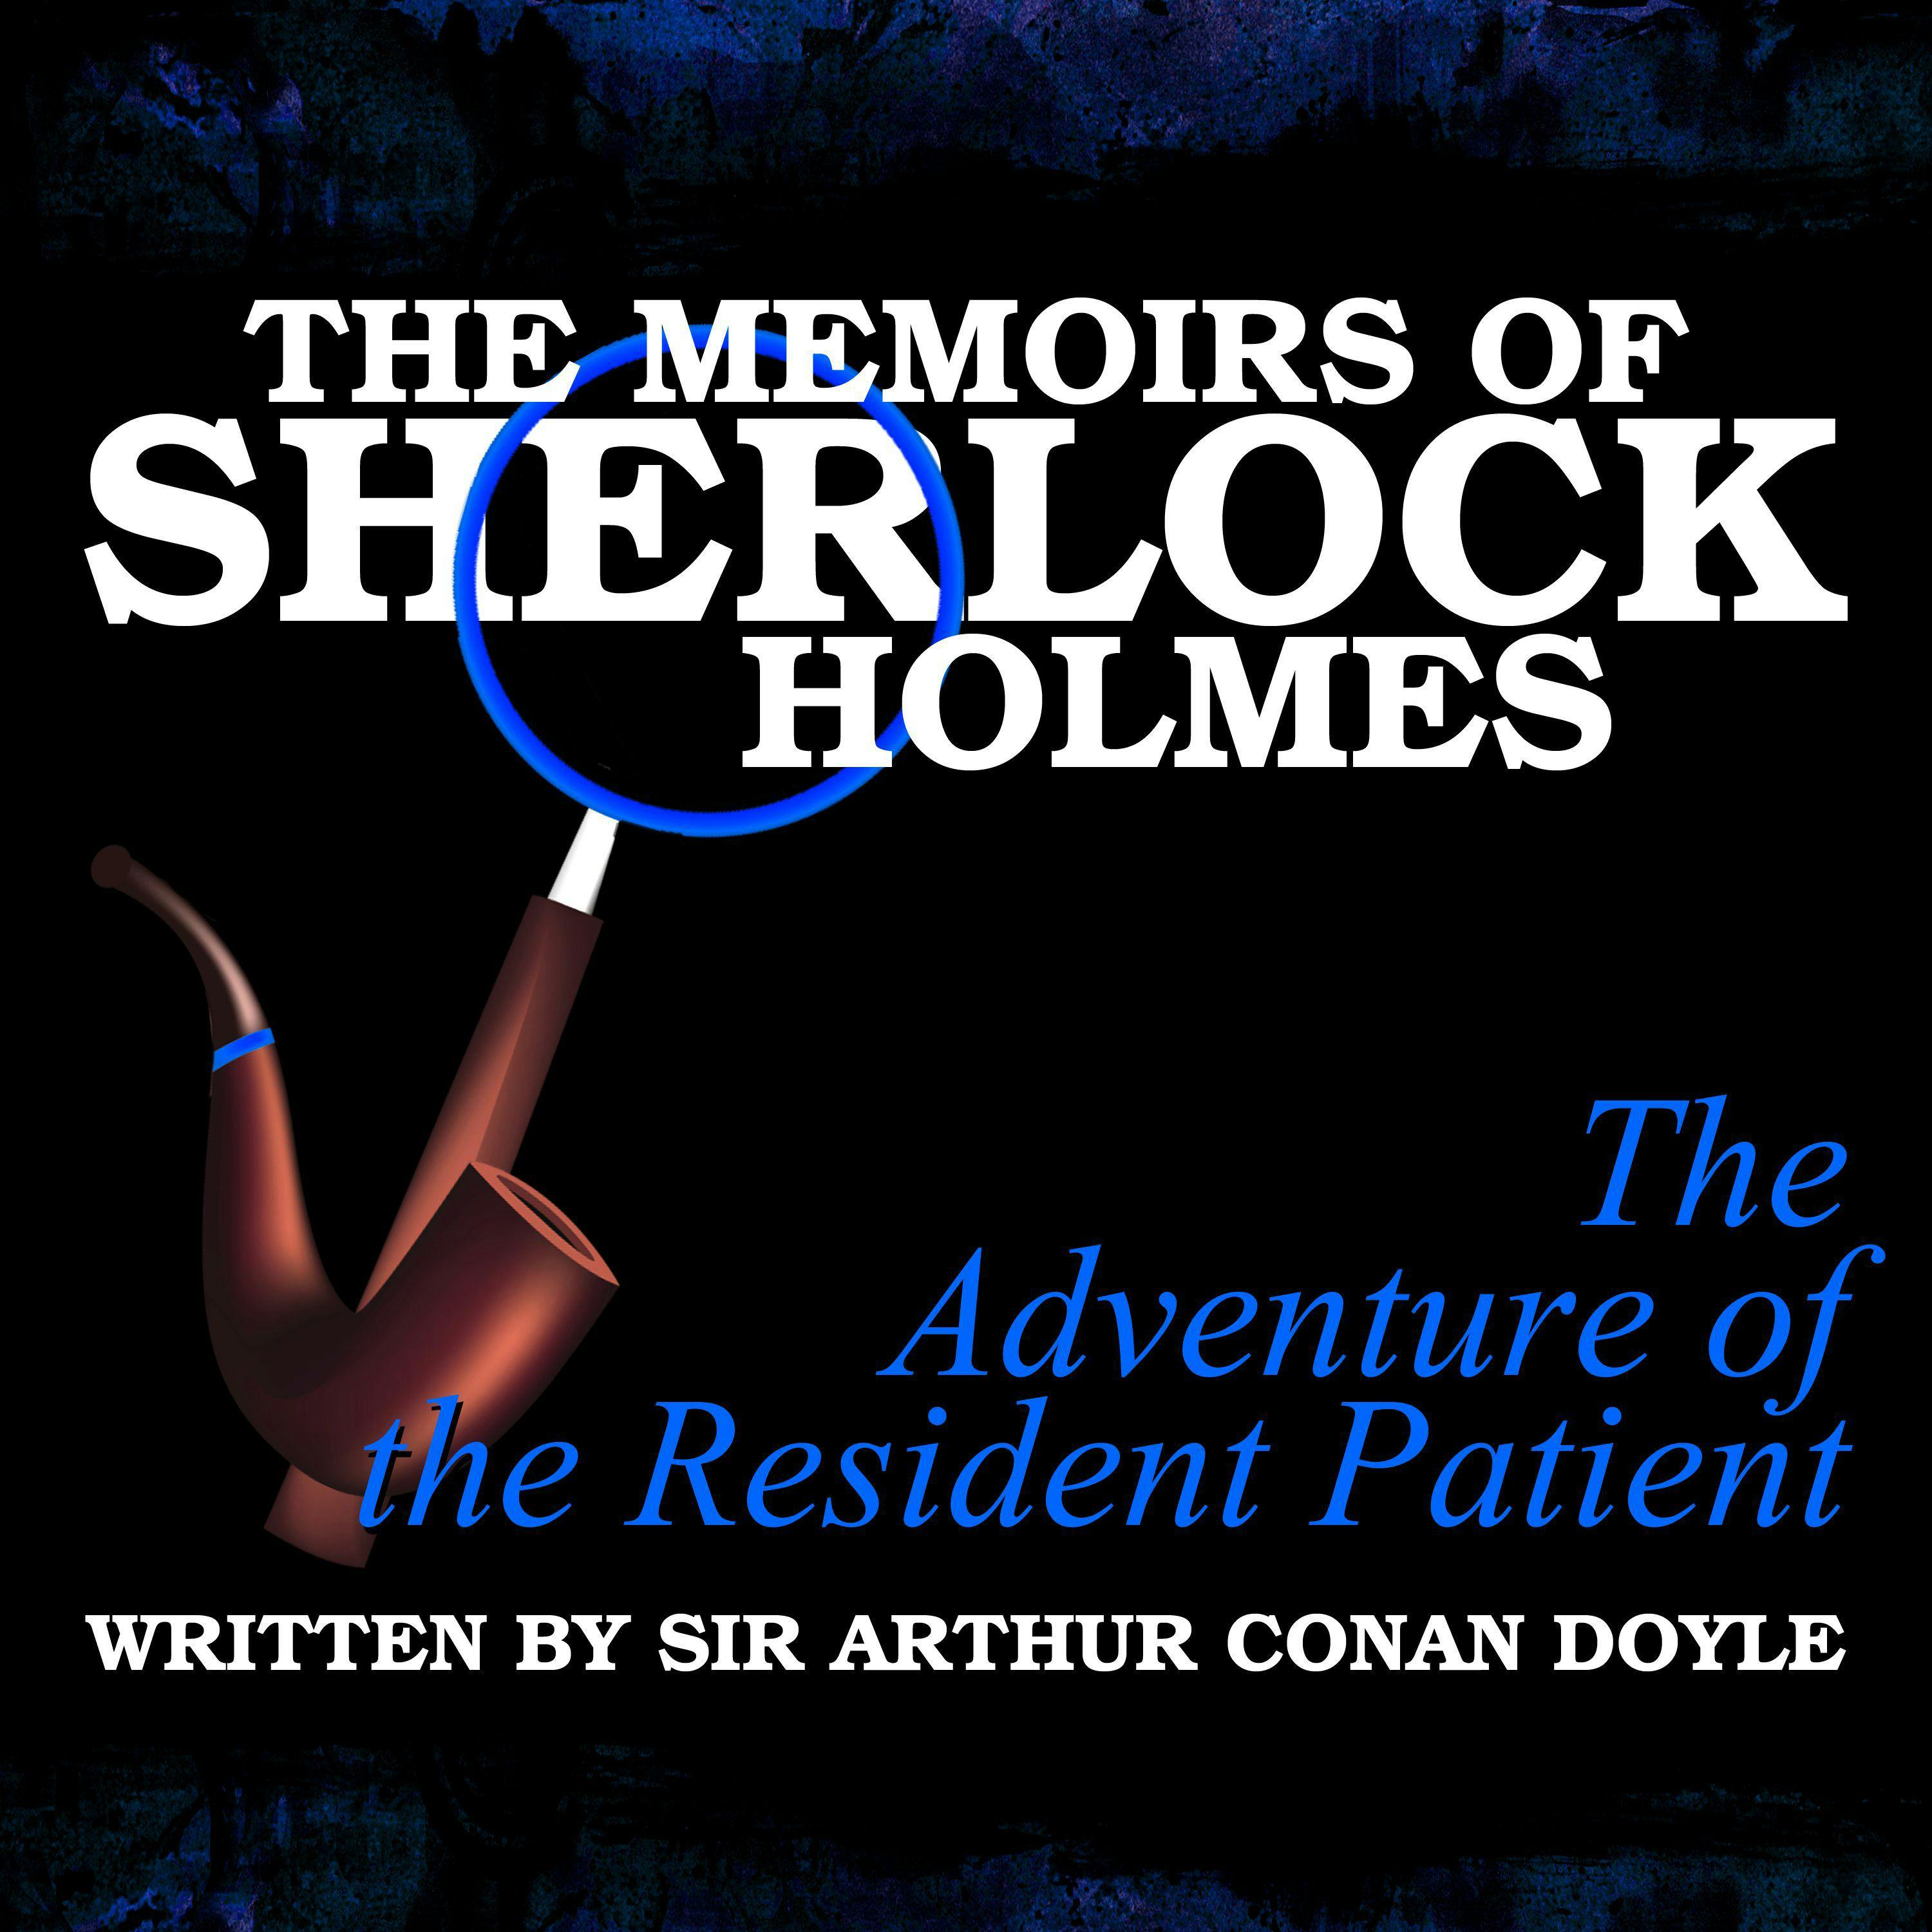 The Memoirs of Sherlock Holmes: The Adventure of the Resident Patient - undefined